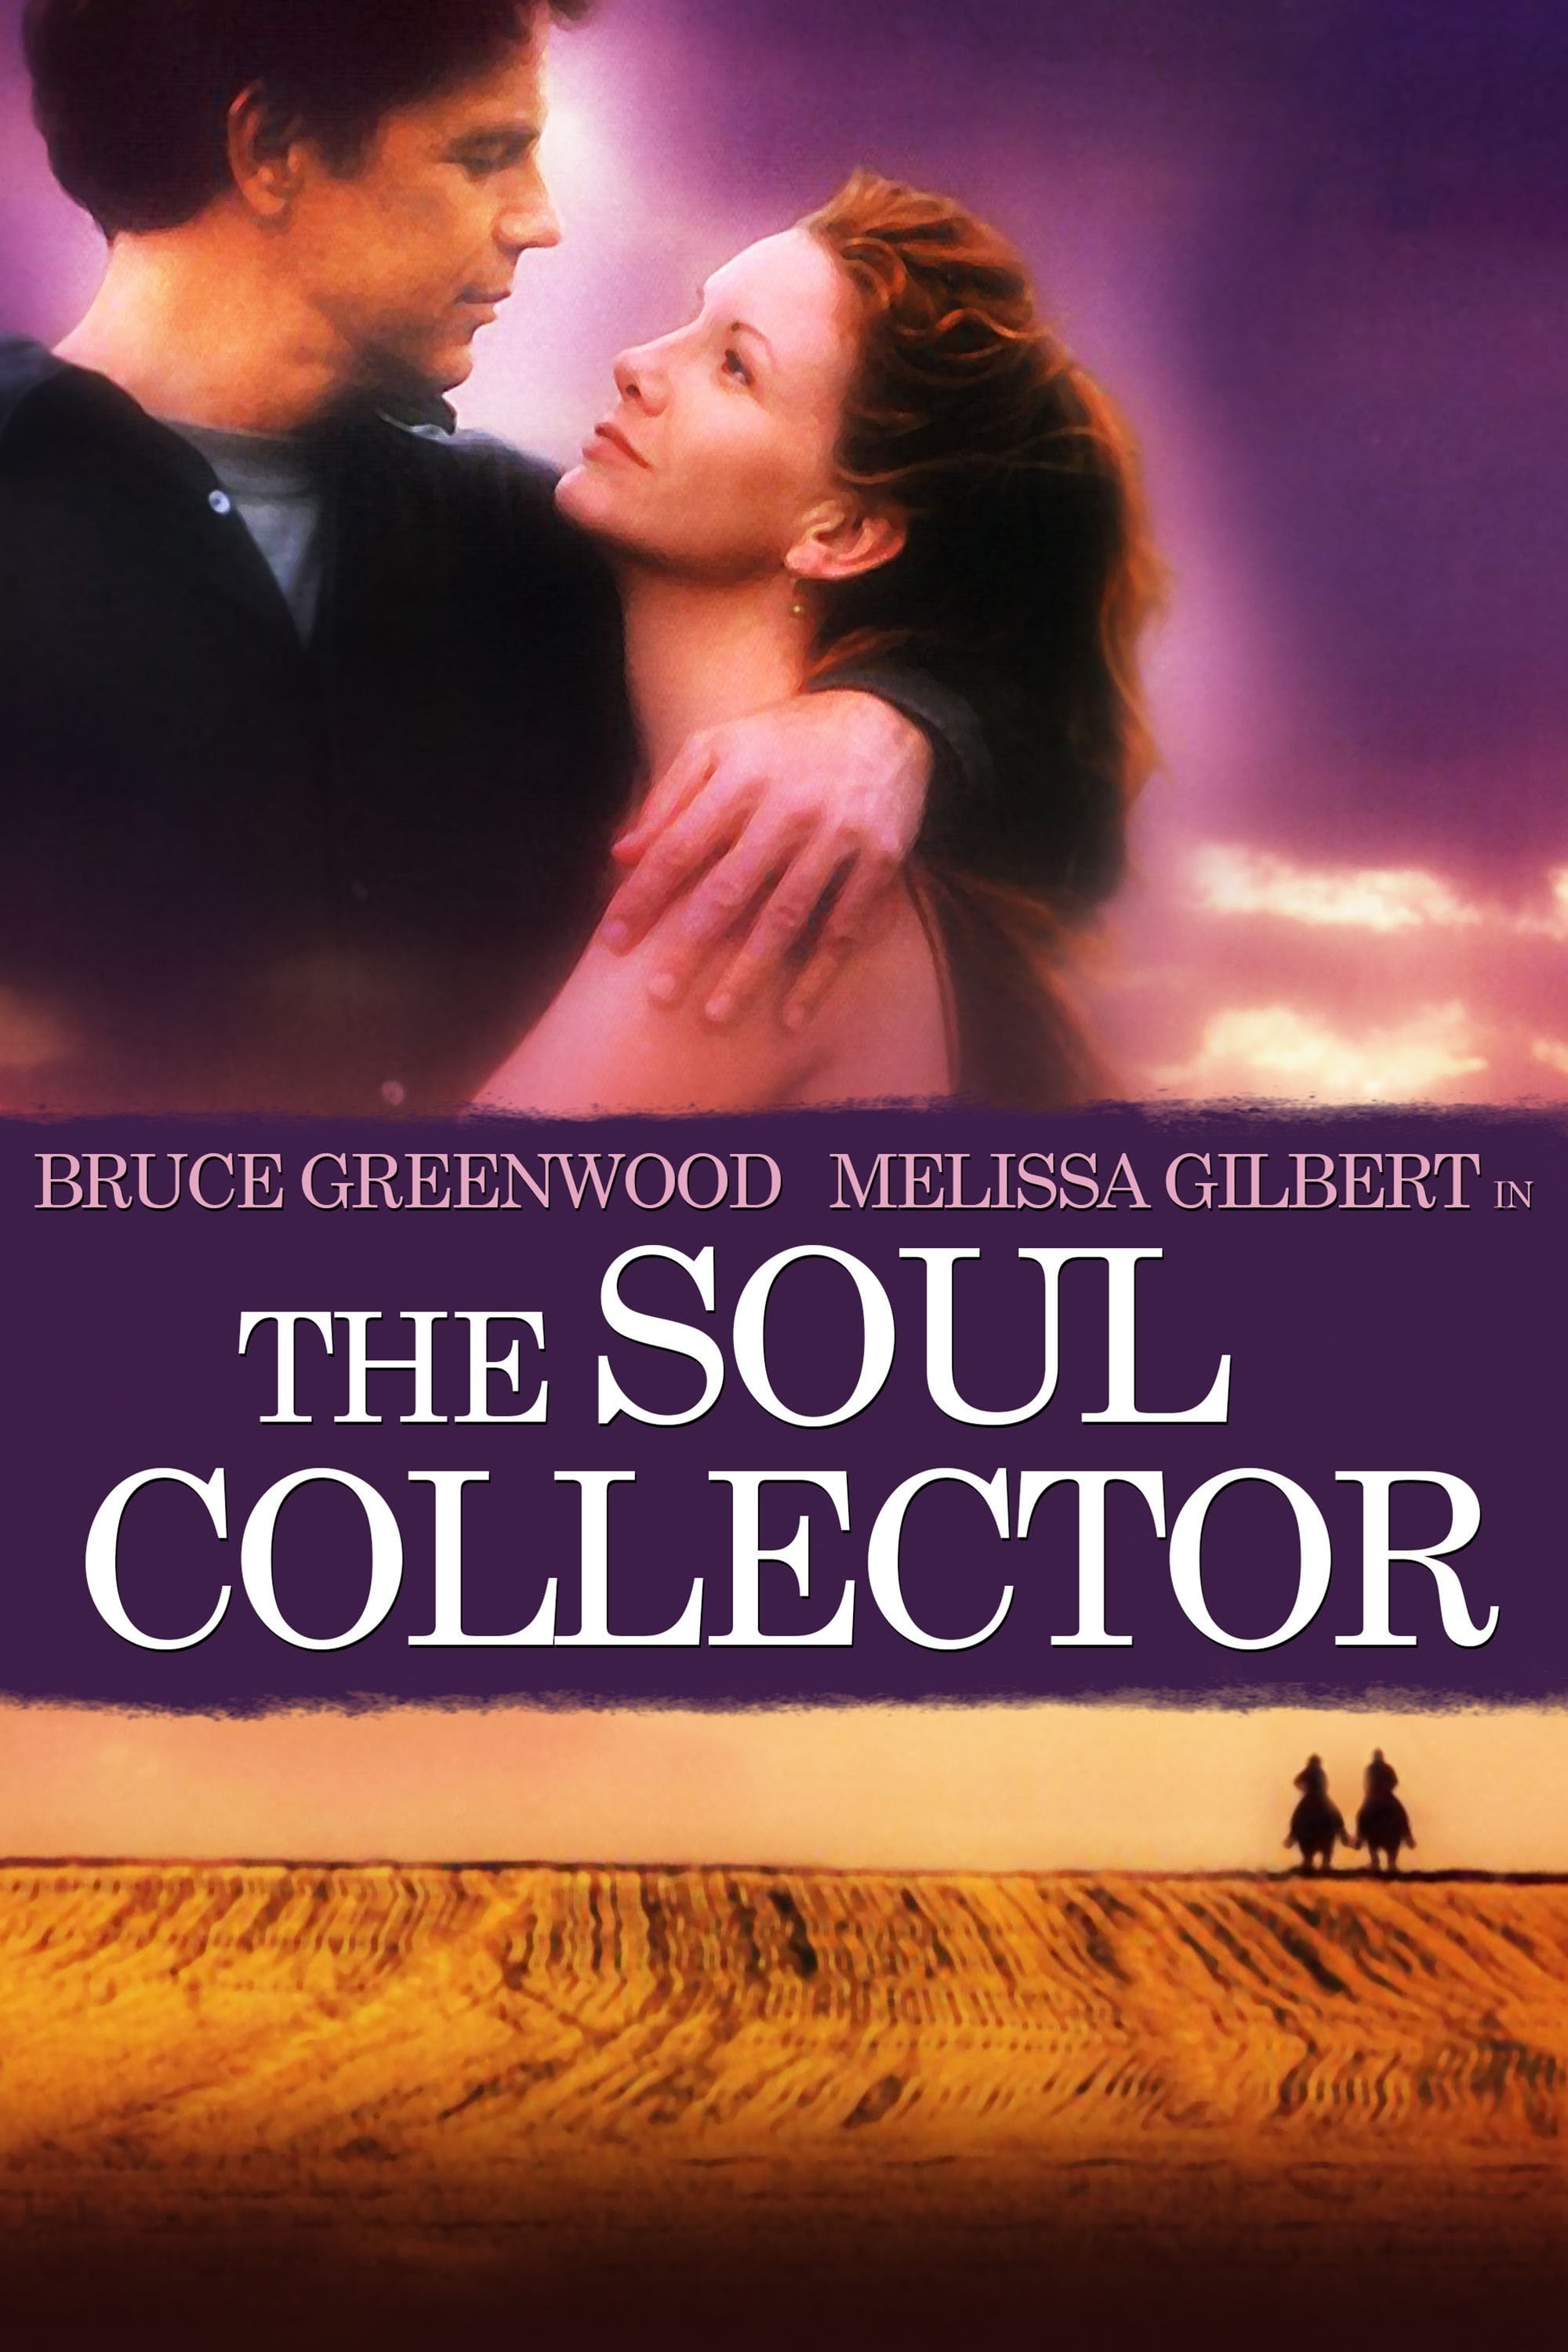 The Soul Collector (1999)